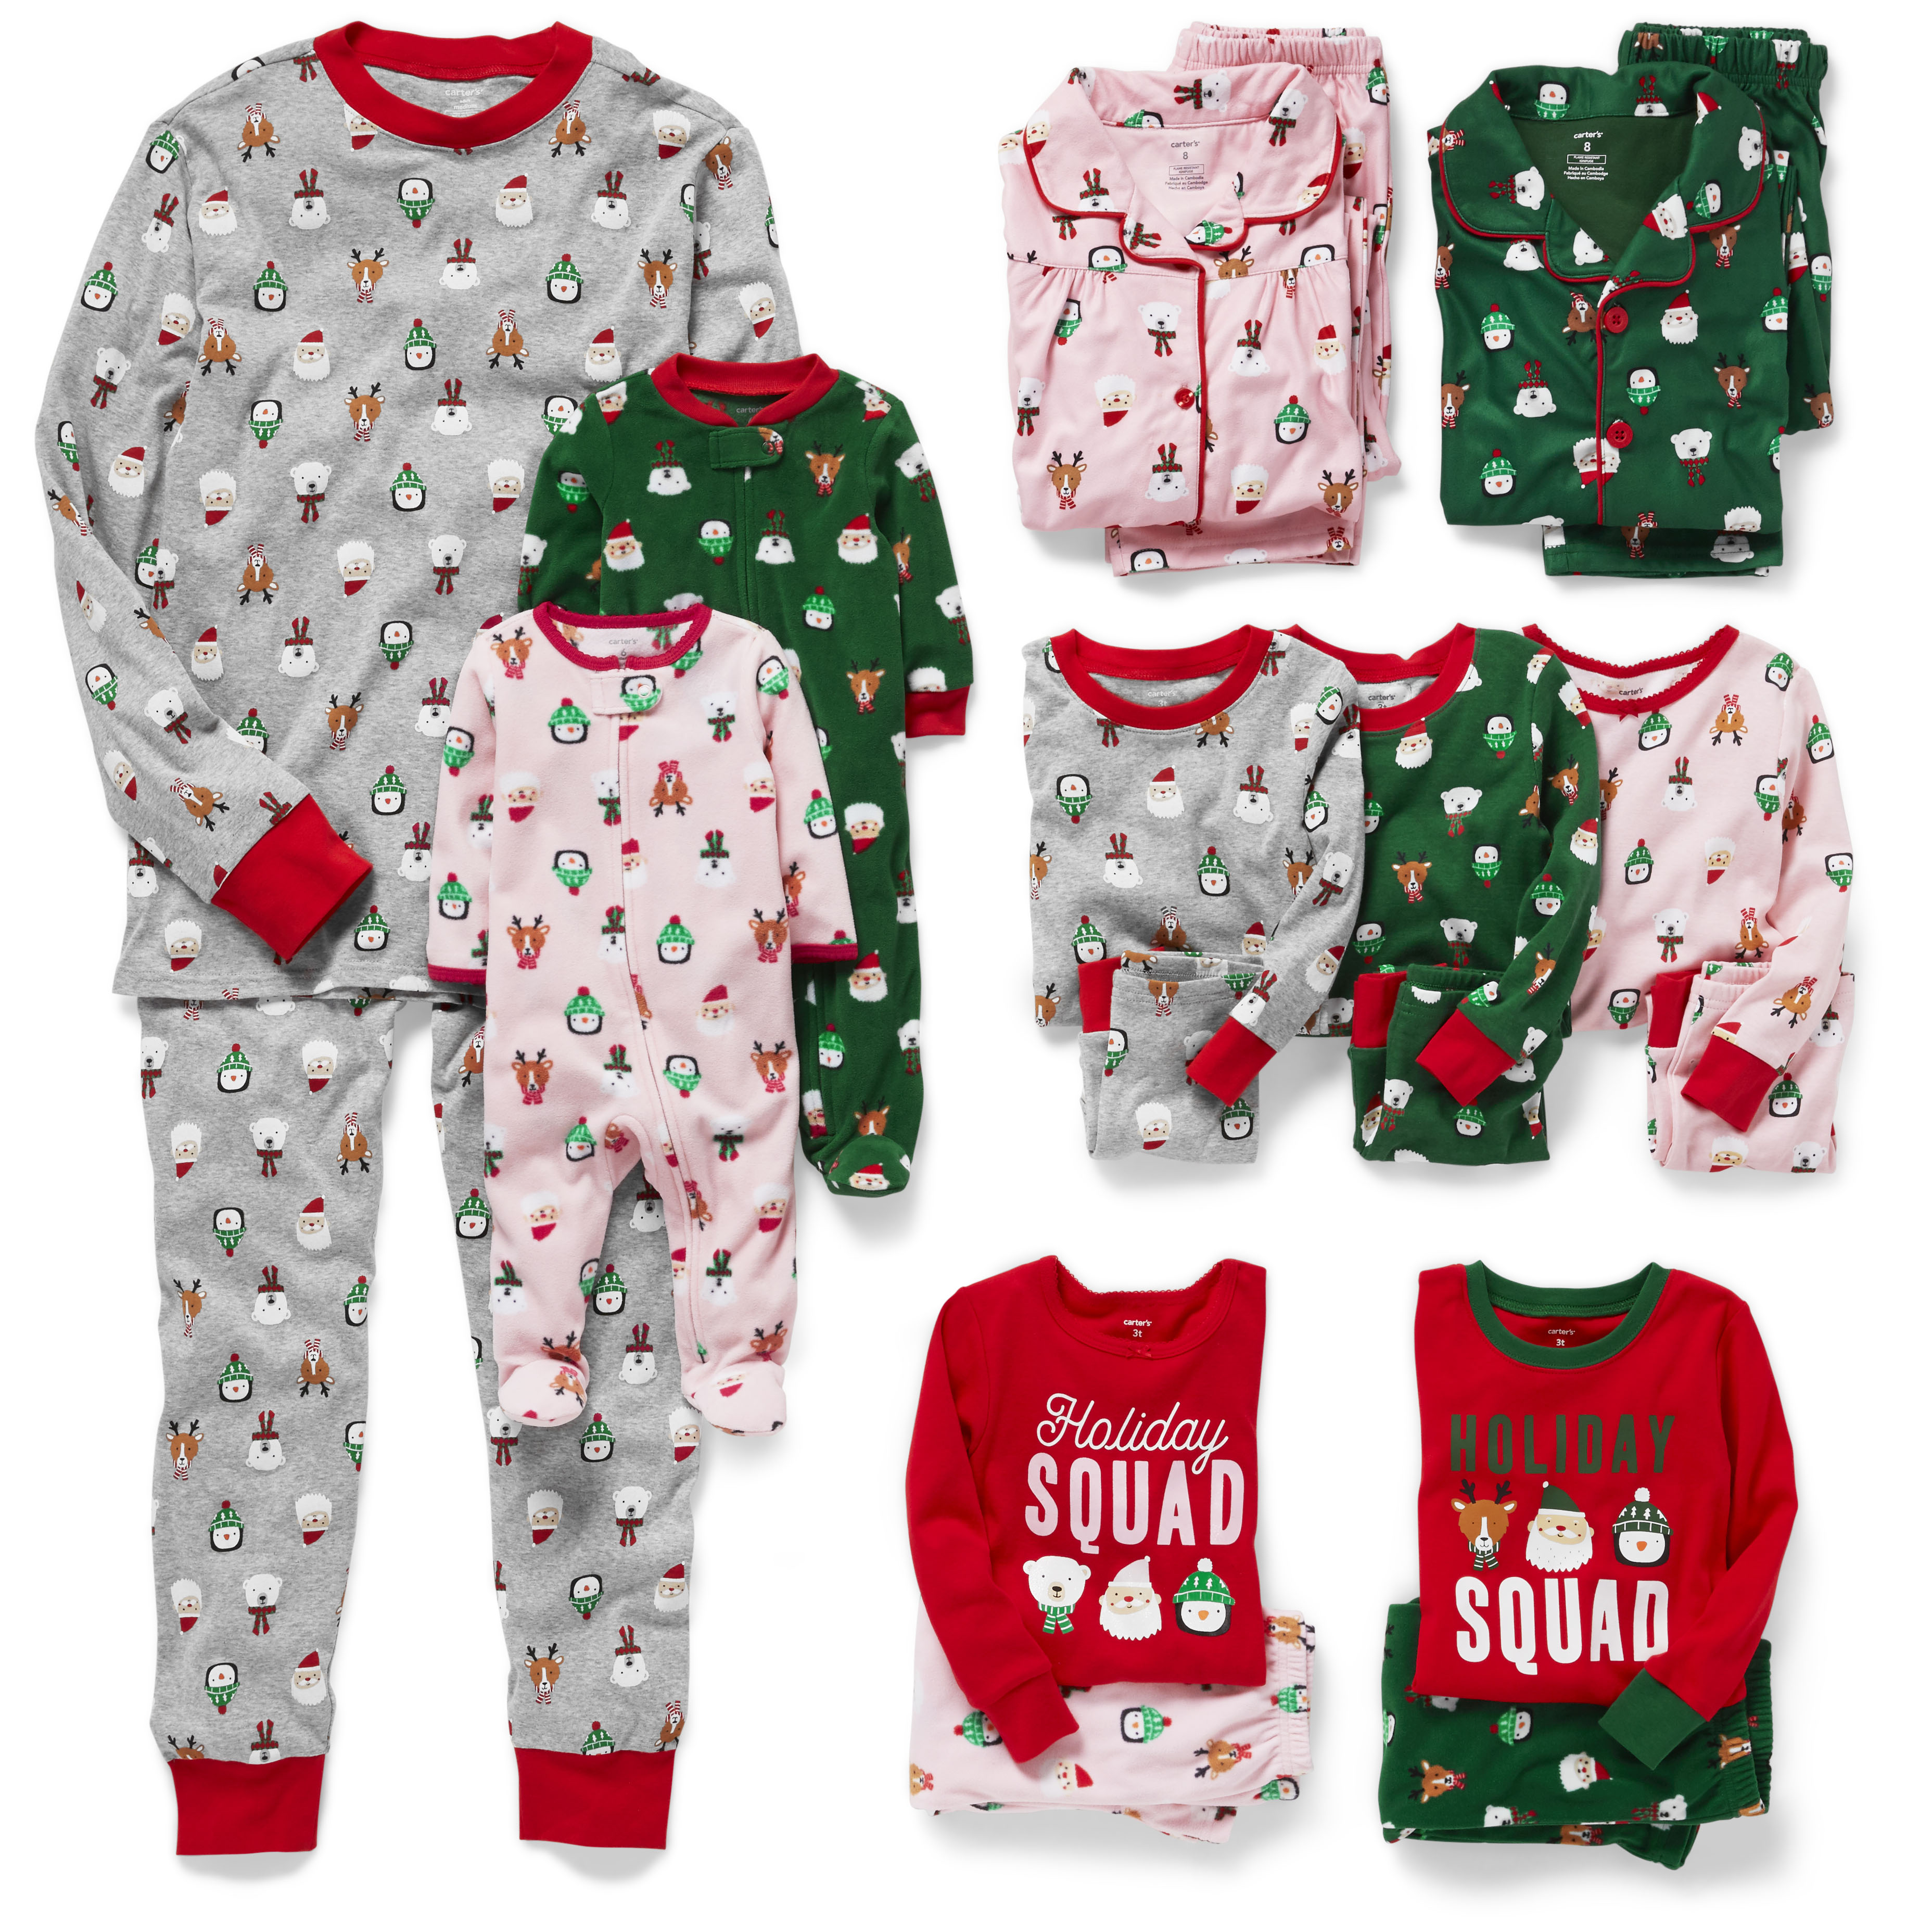 These Carter S Matching Family Holiday Pajamas Are Too Flippin Cute